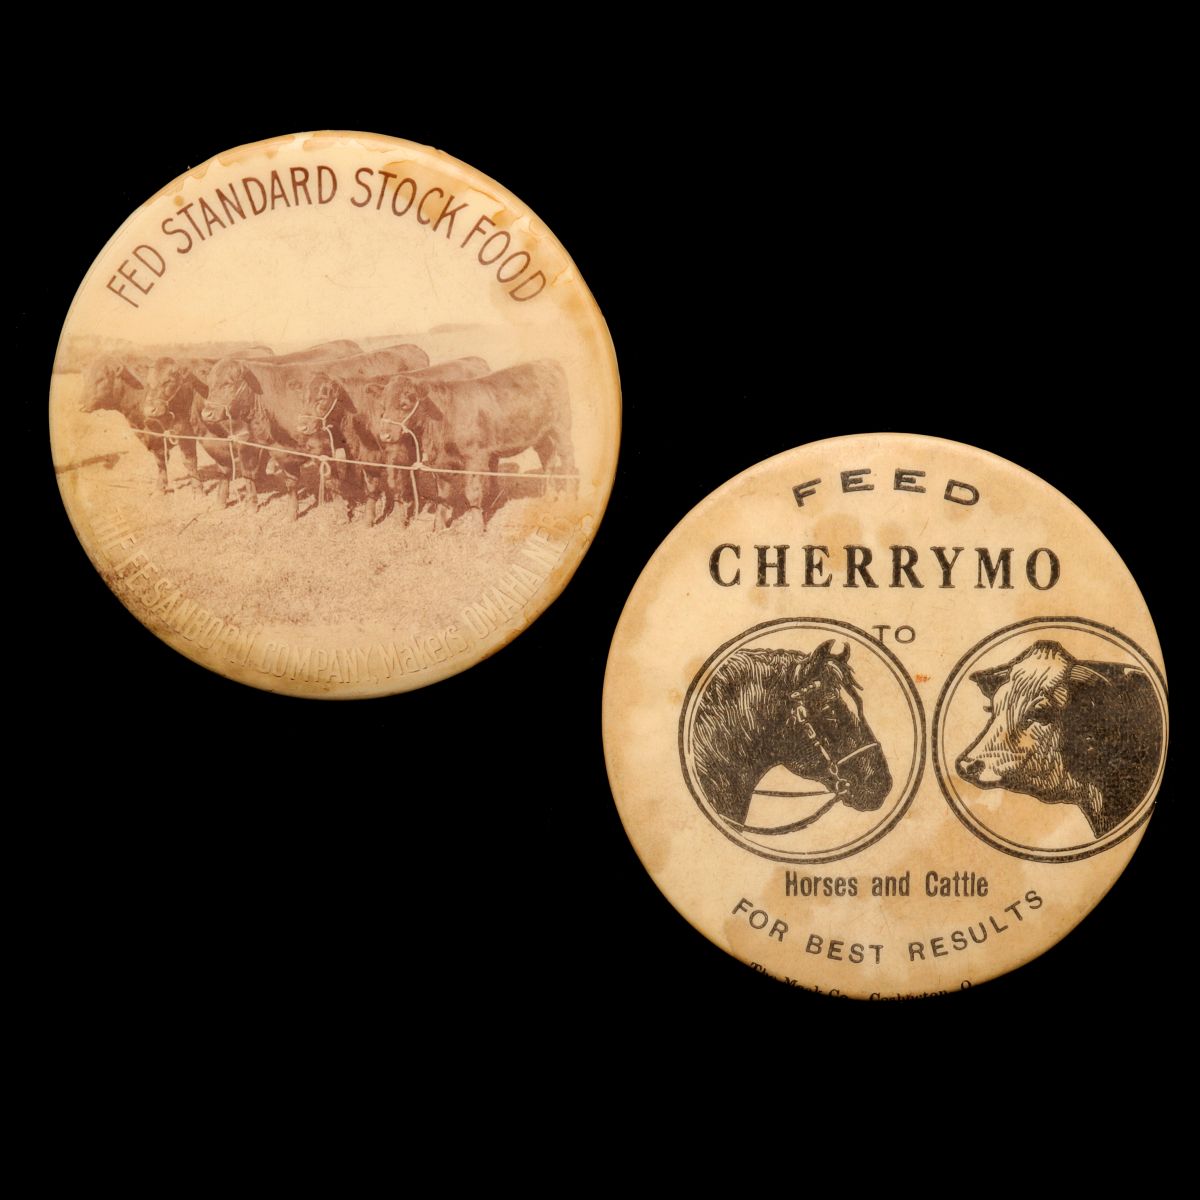 SANBORN OMAHA AND CHERRYMO STOCK FEED PINBACK BUTTONS